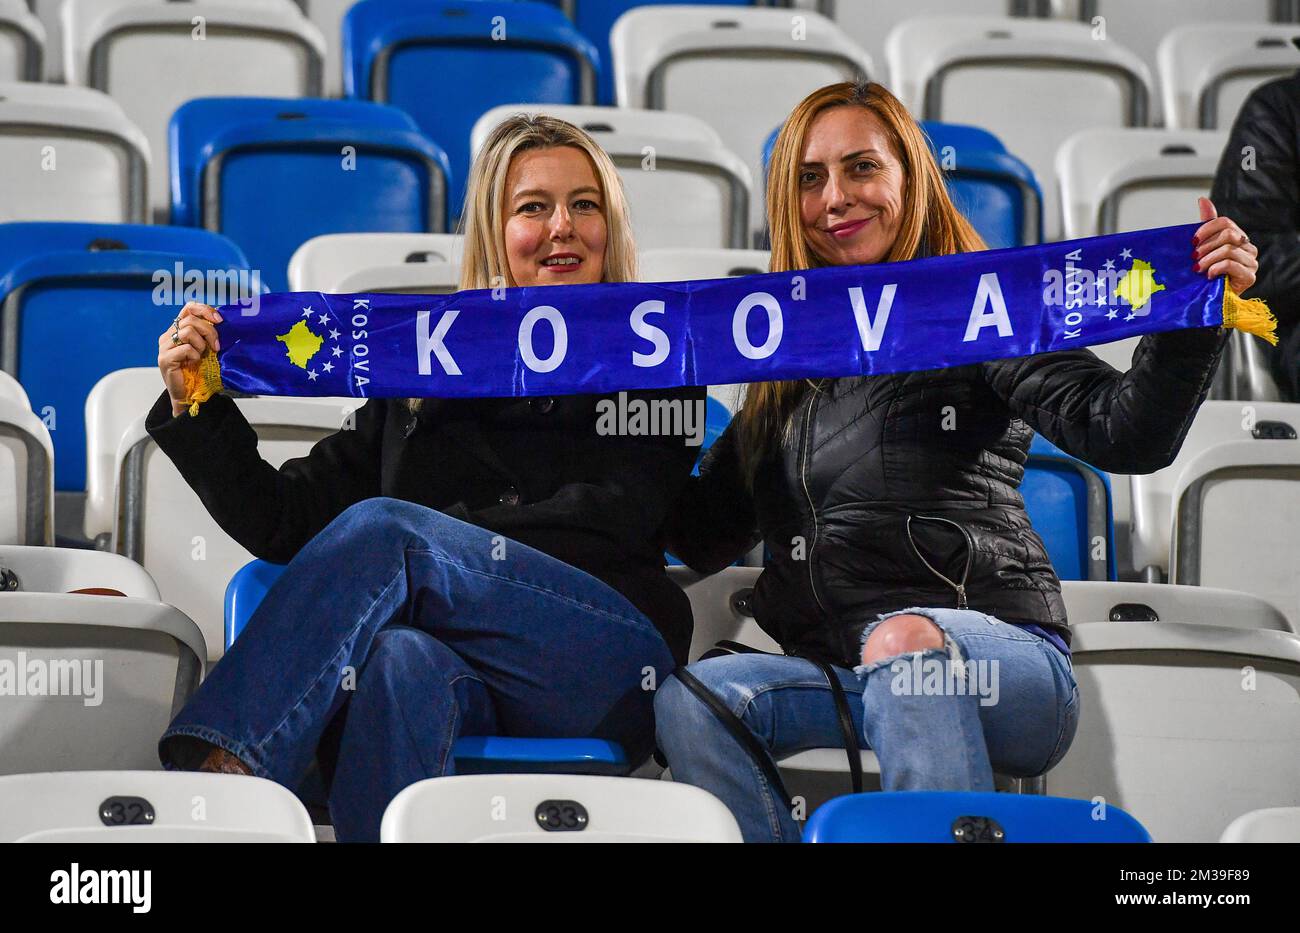 fans of Kosova pictured during the match between Belgium's national women's soccer team the Red Flames and Kosovo, in Pristina, Kosovo, Tuesday 12 April 2022, match 8 (out of ten) in group F of the qualifications group stage for the women's 2023 World Cup. BELGA PHOTO DAVID CATRY Stock Photo